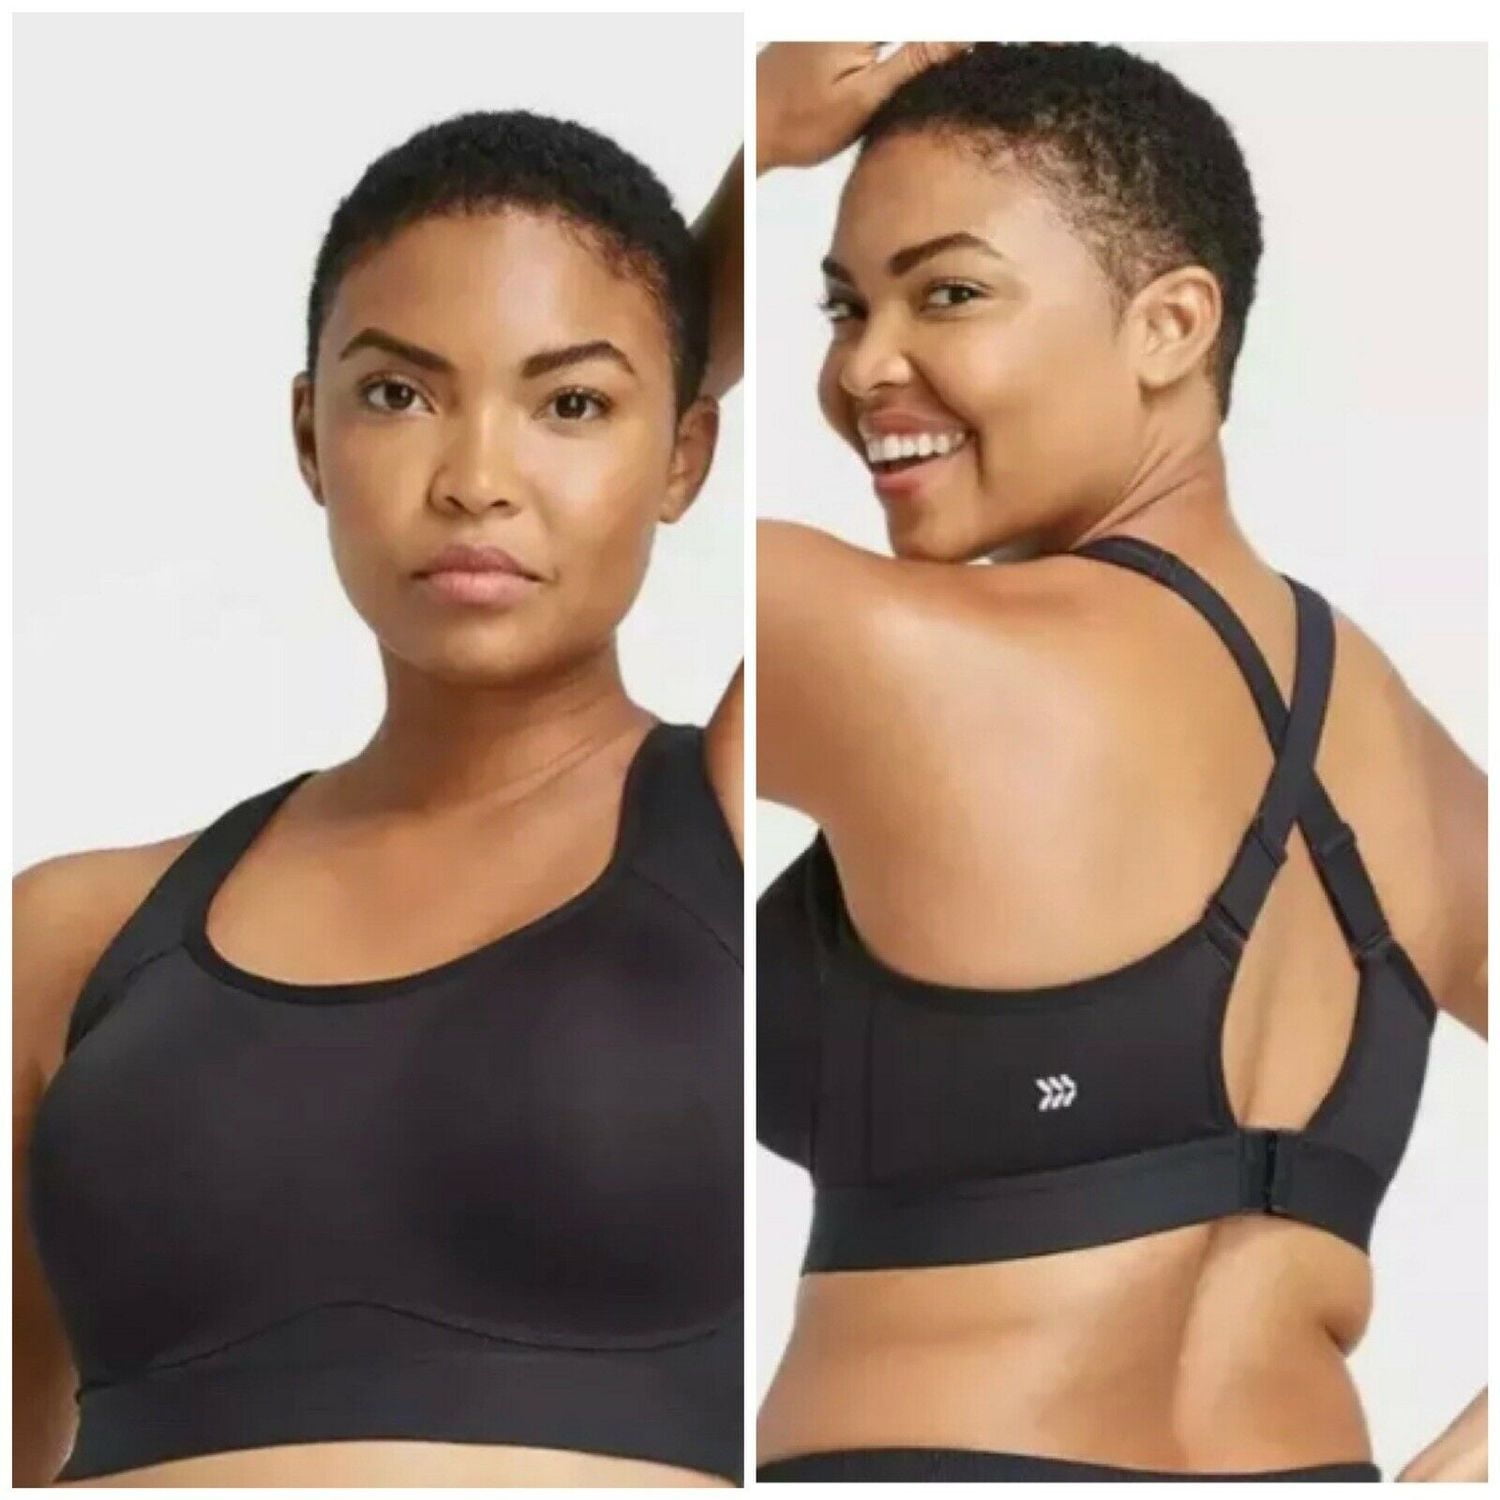 ALL IN MOTION Women's Plus Size High Support Convertible Strap Bra In Black,  42D 